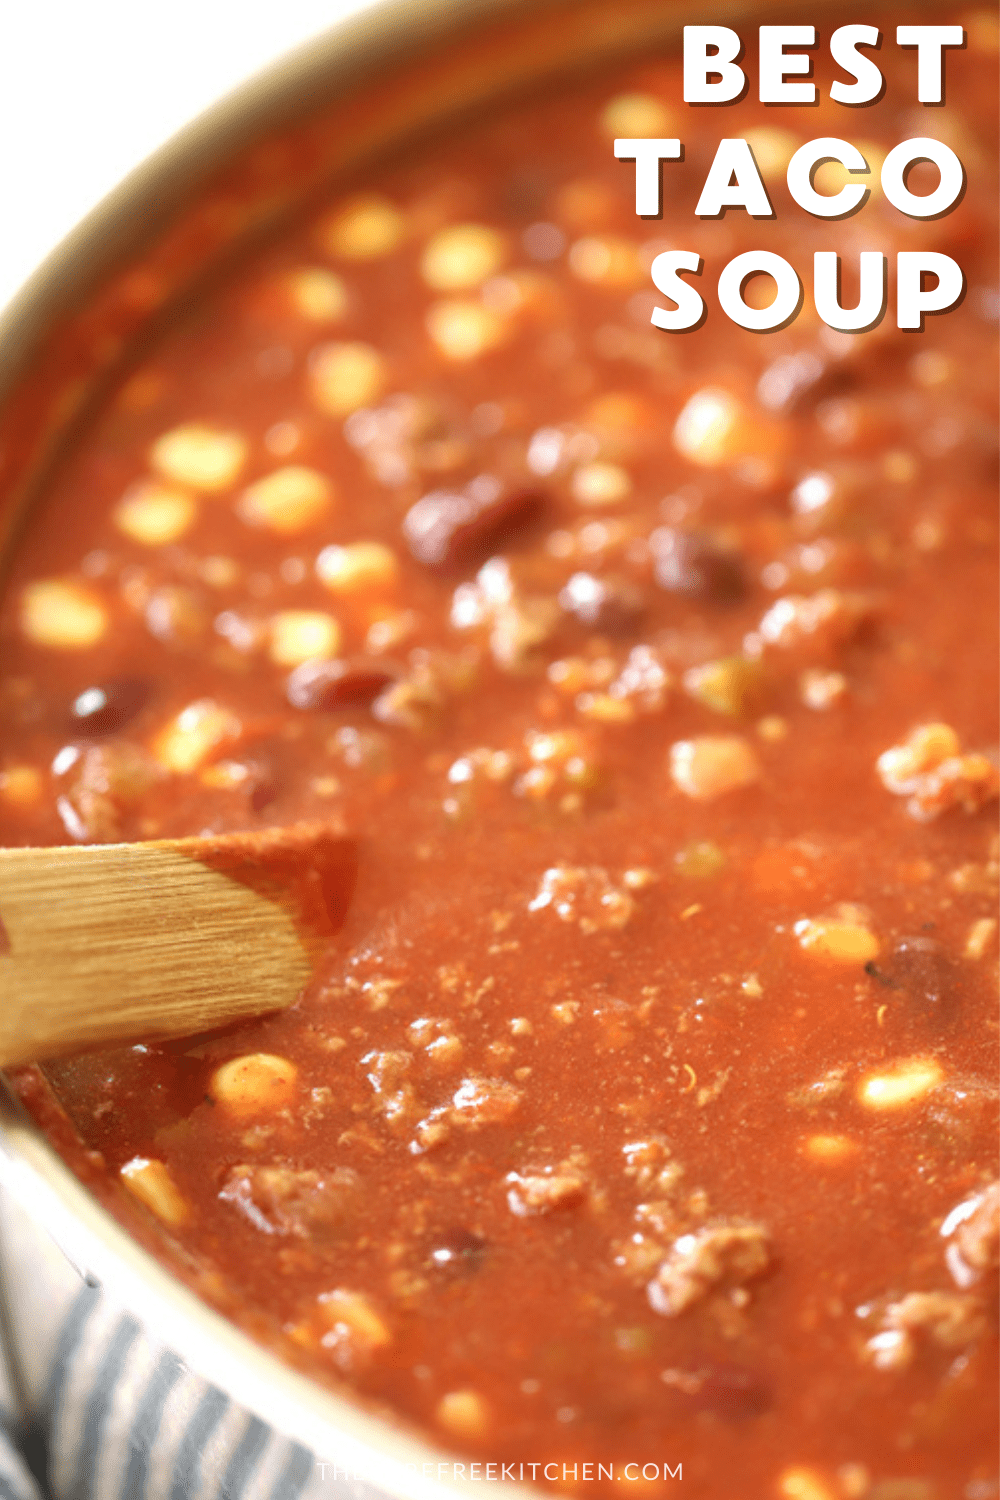 Best Taco Soup Recipe - The Carefree Kitchen